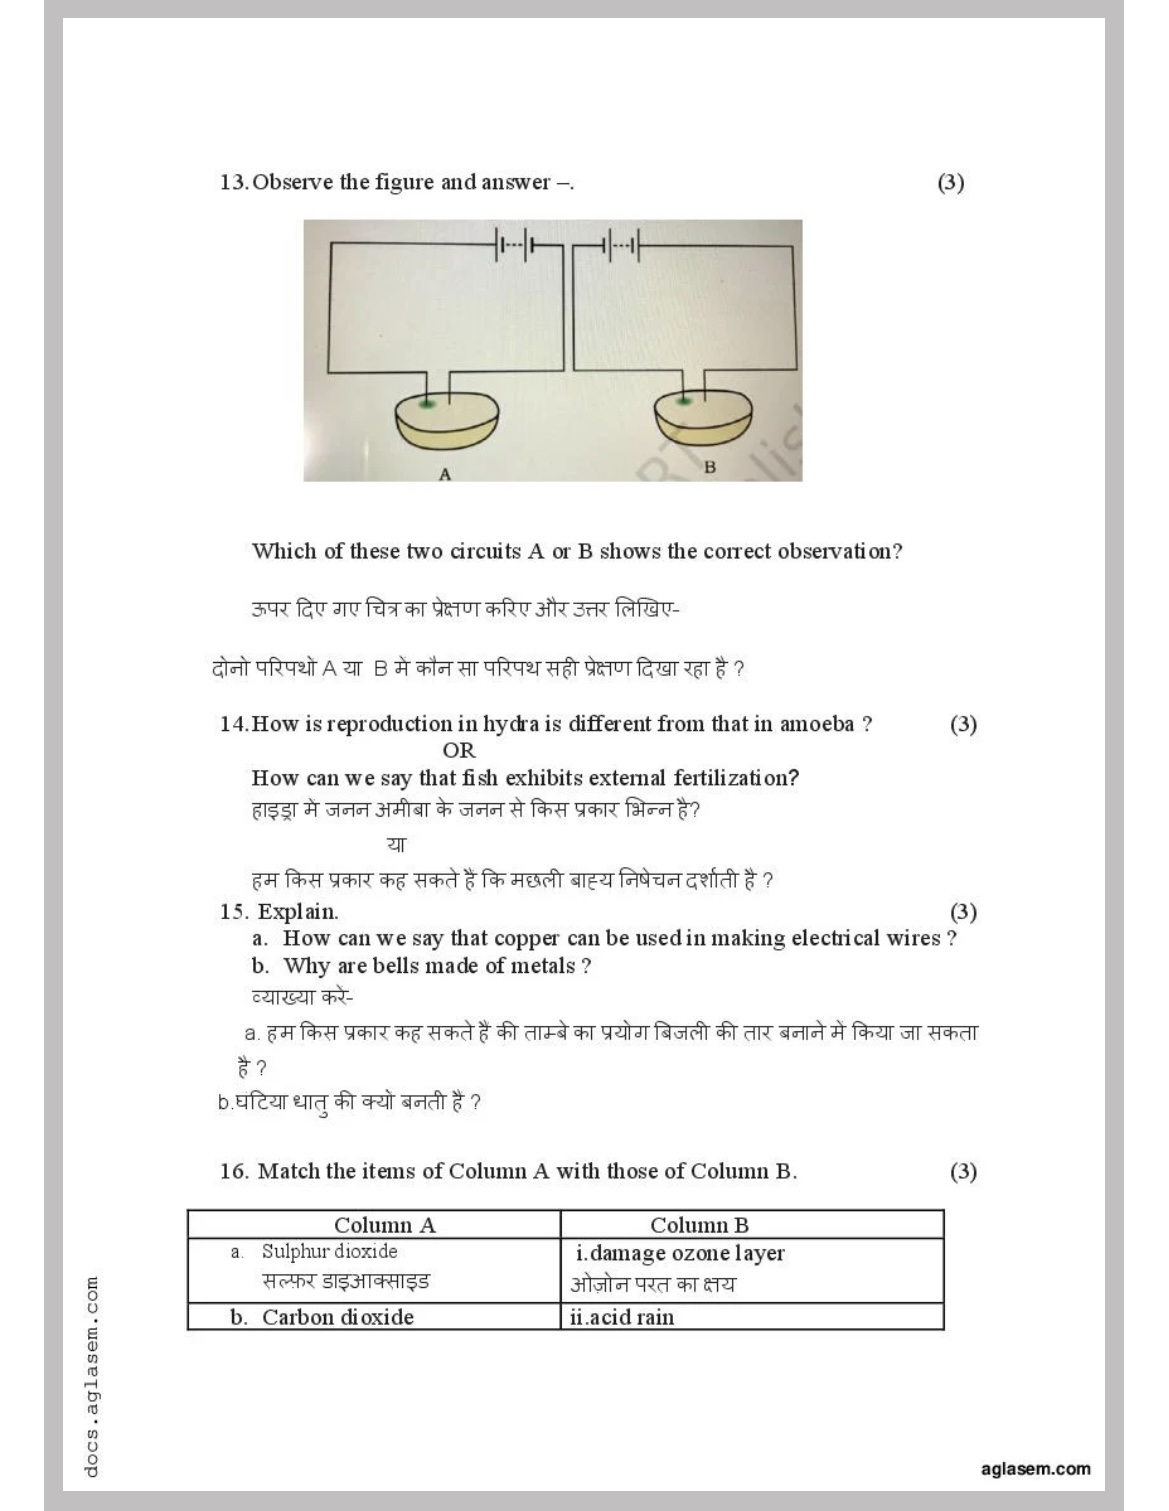 Sample paper - science ( class 8 )-AADE30E4-C786-4A4D-AED8-1C016ED34B41.jpeg